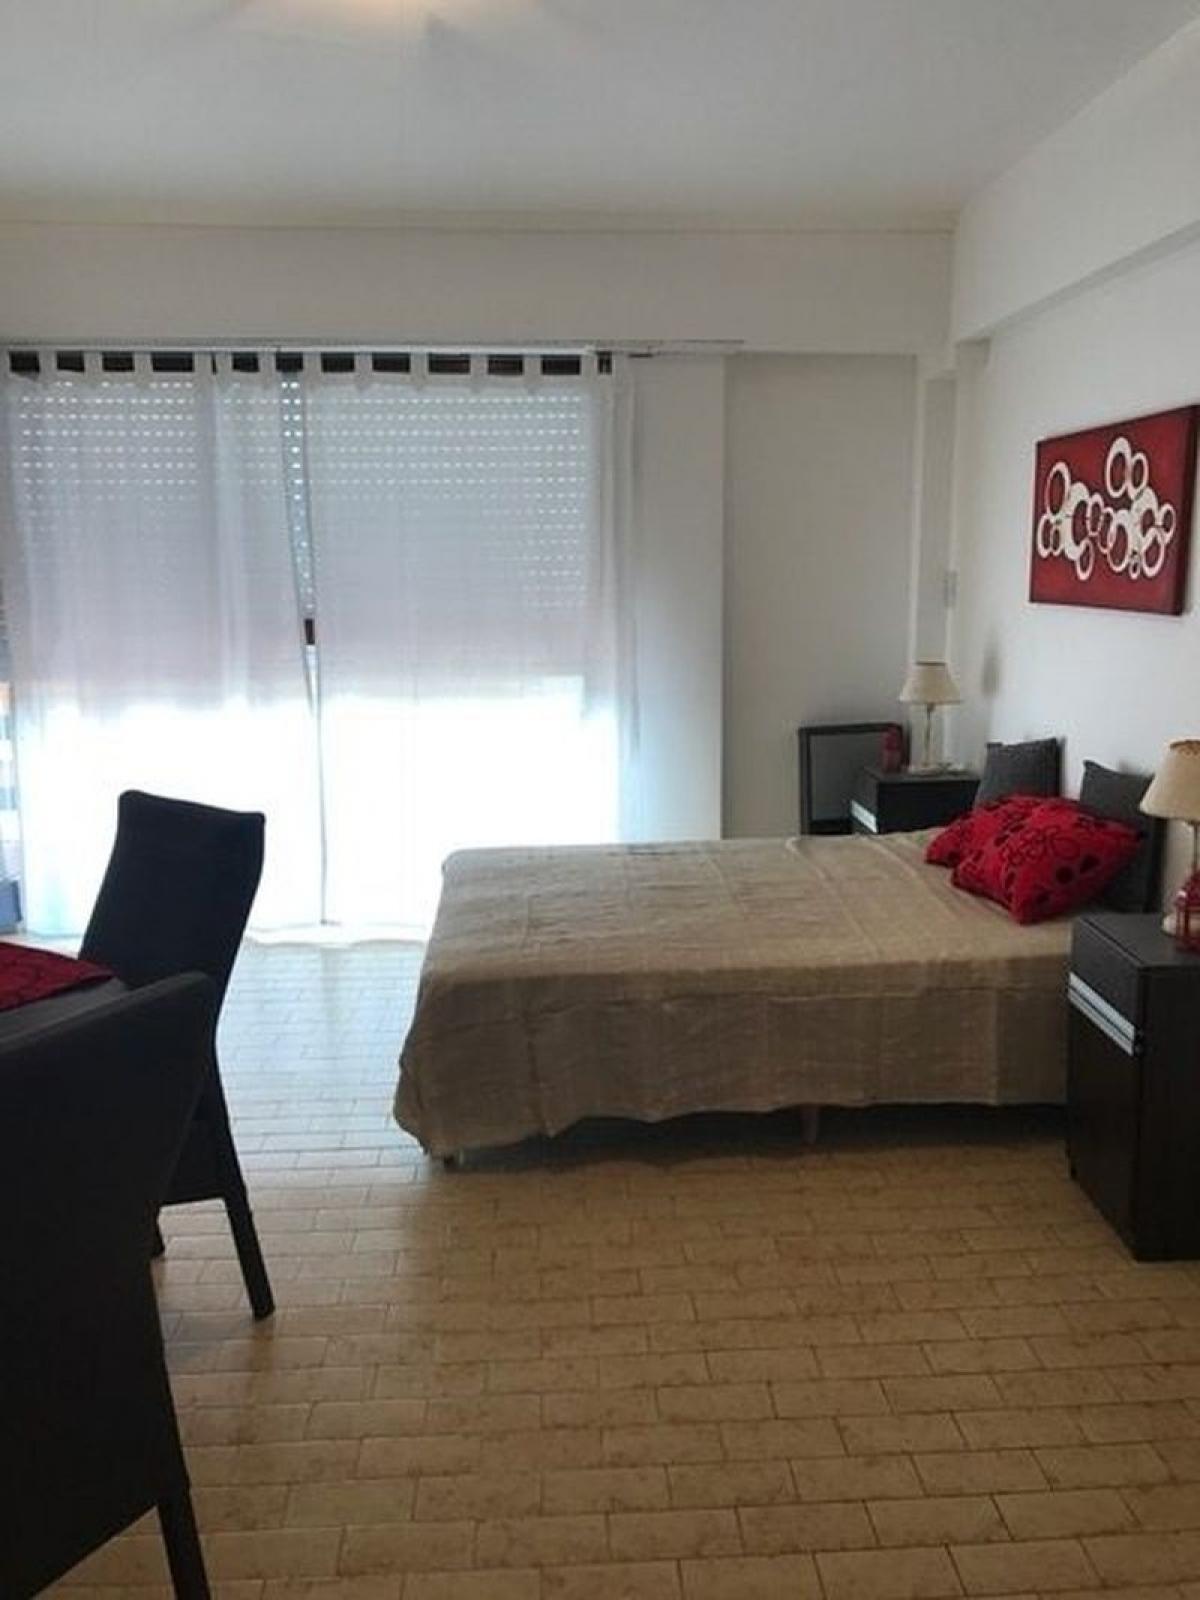 Picture of Apartment For Sale in Buenos Aires Costa Atlantica, Buenos Aires, Argentina